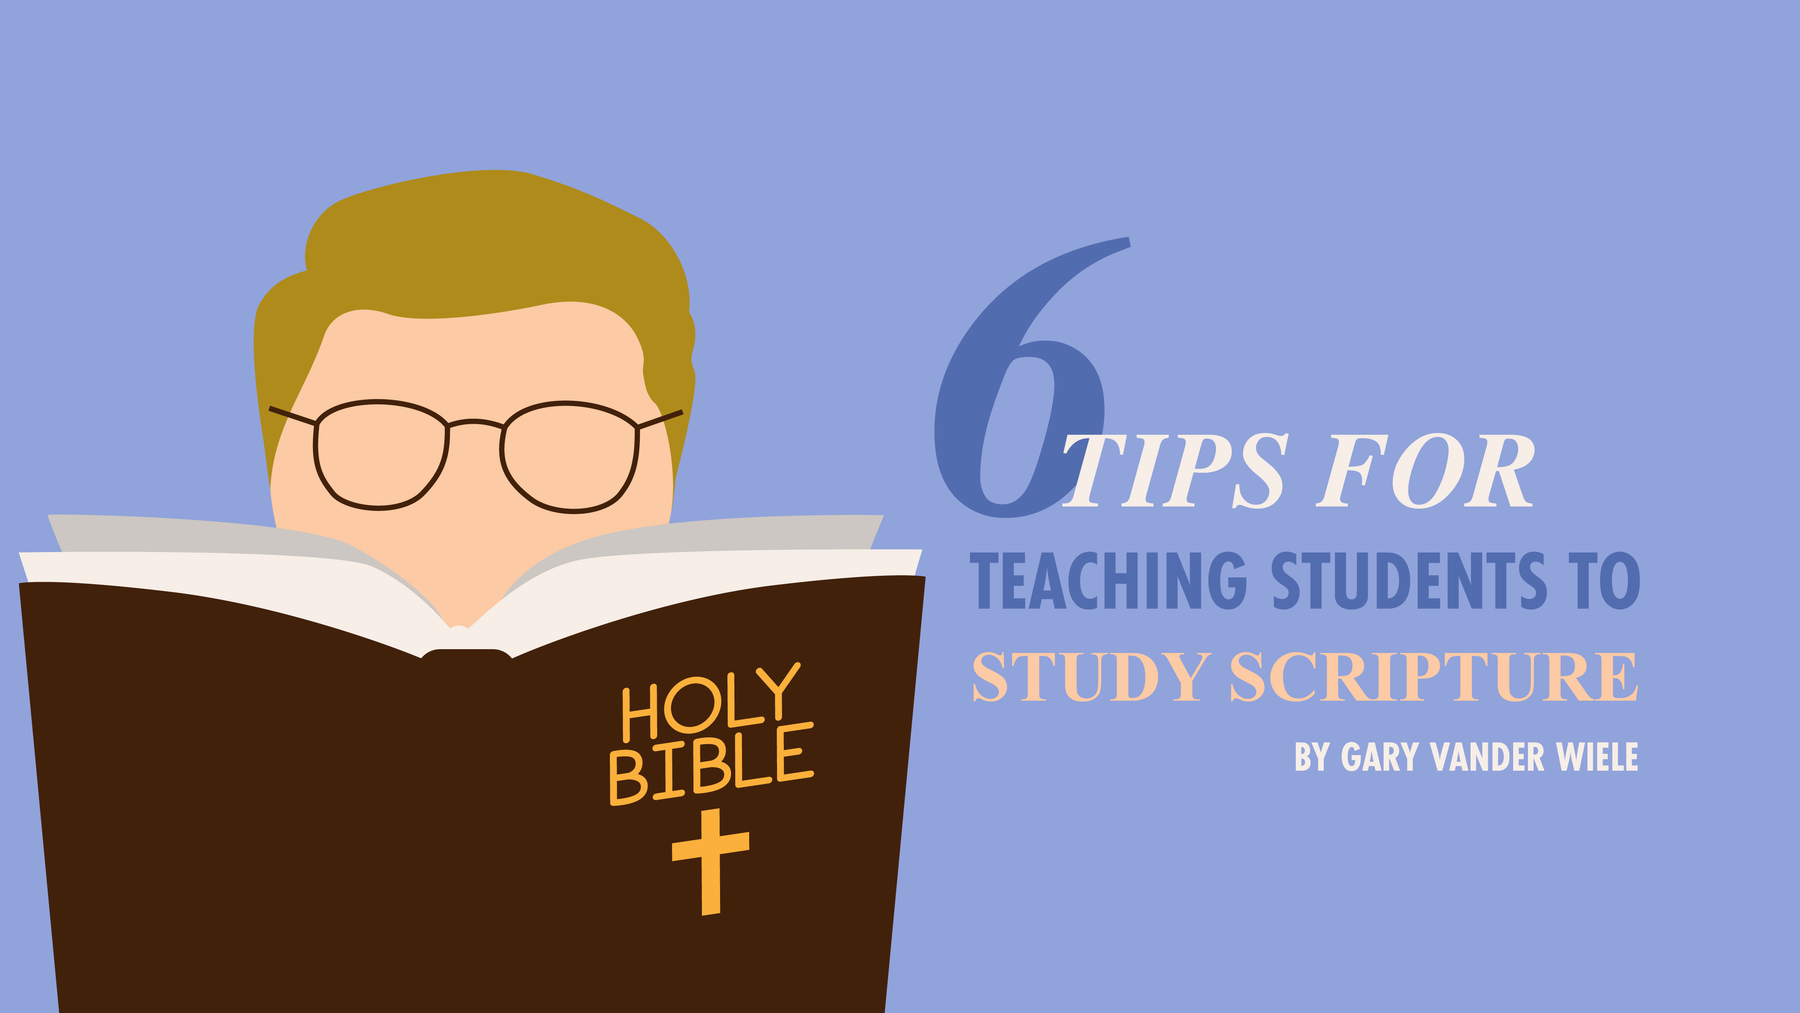 6 Tips for Teaching Students to Study Scripture